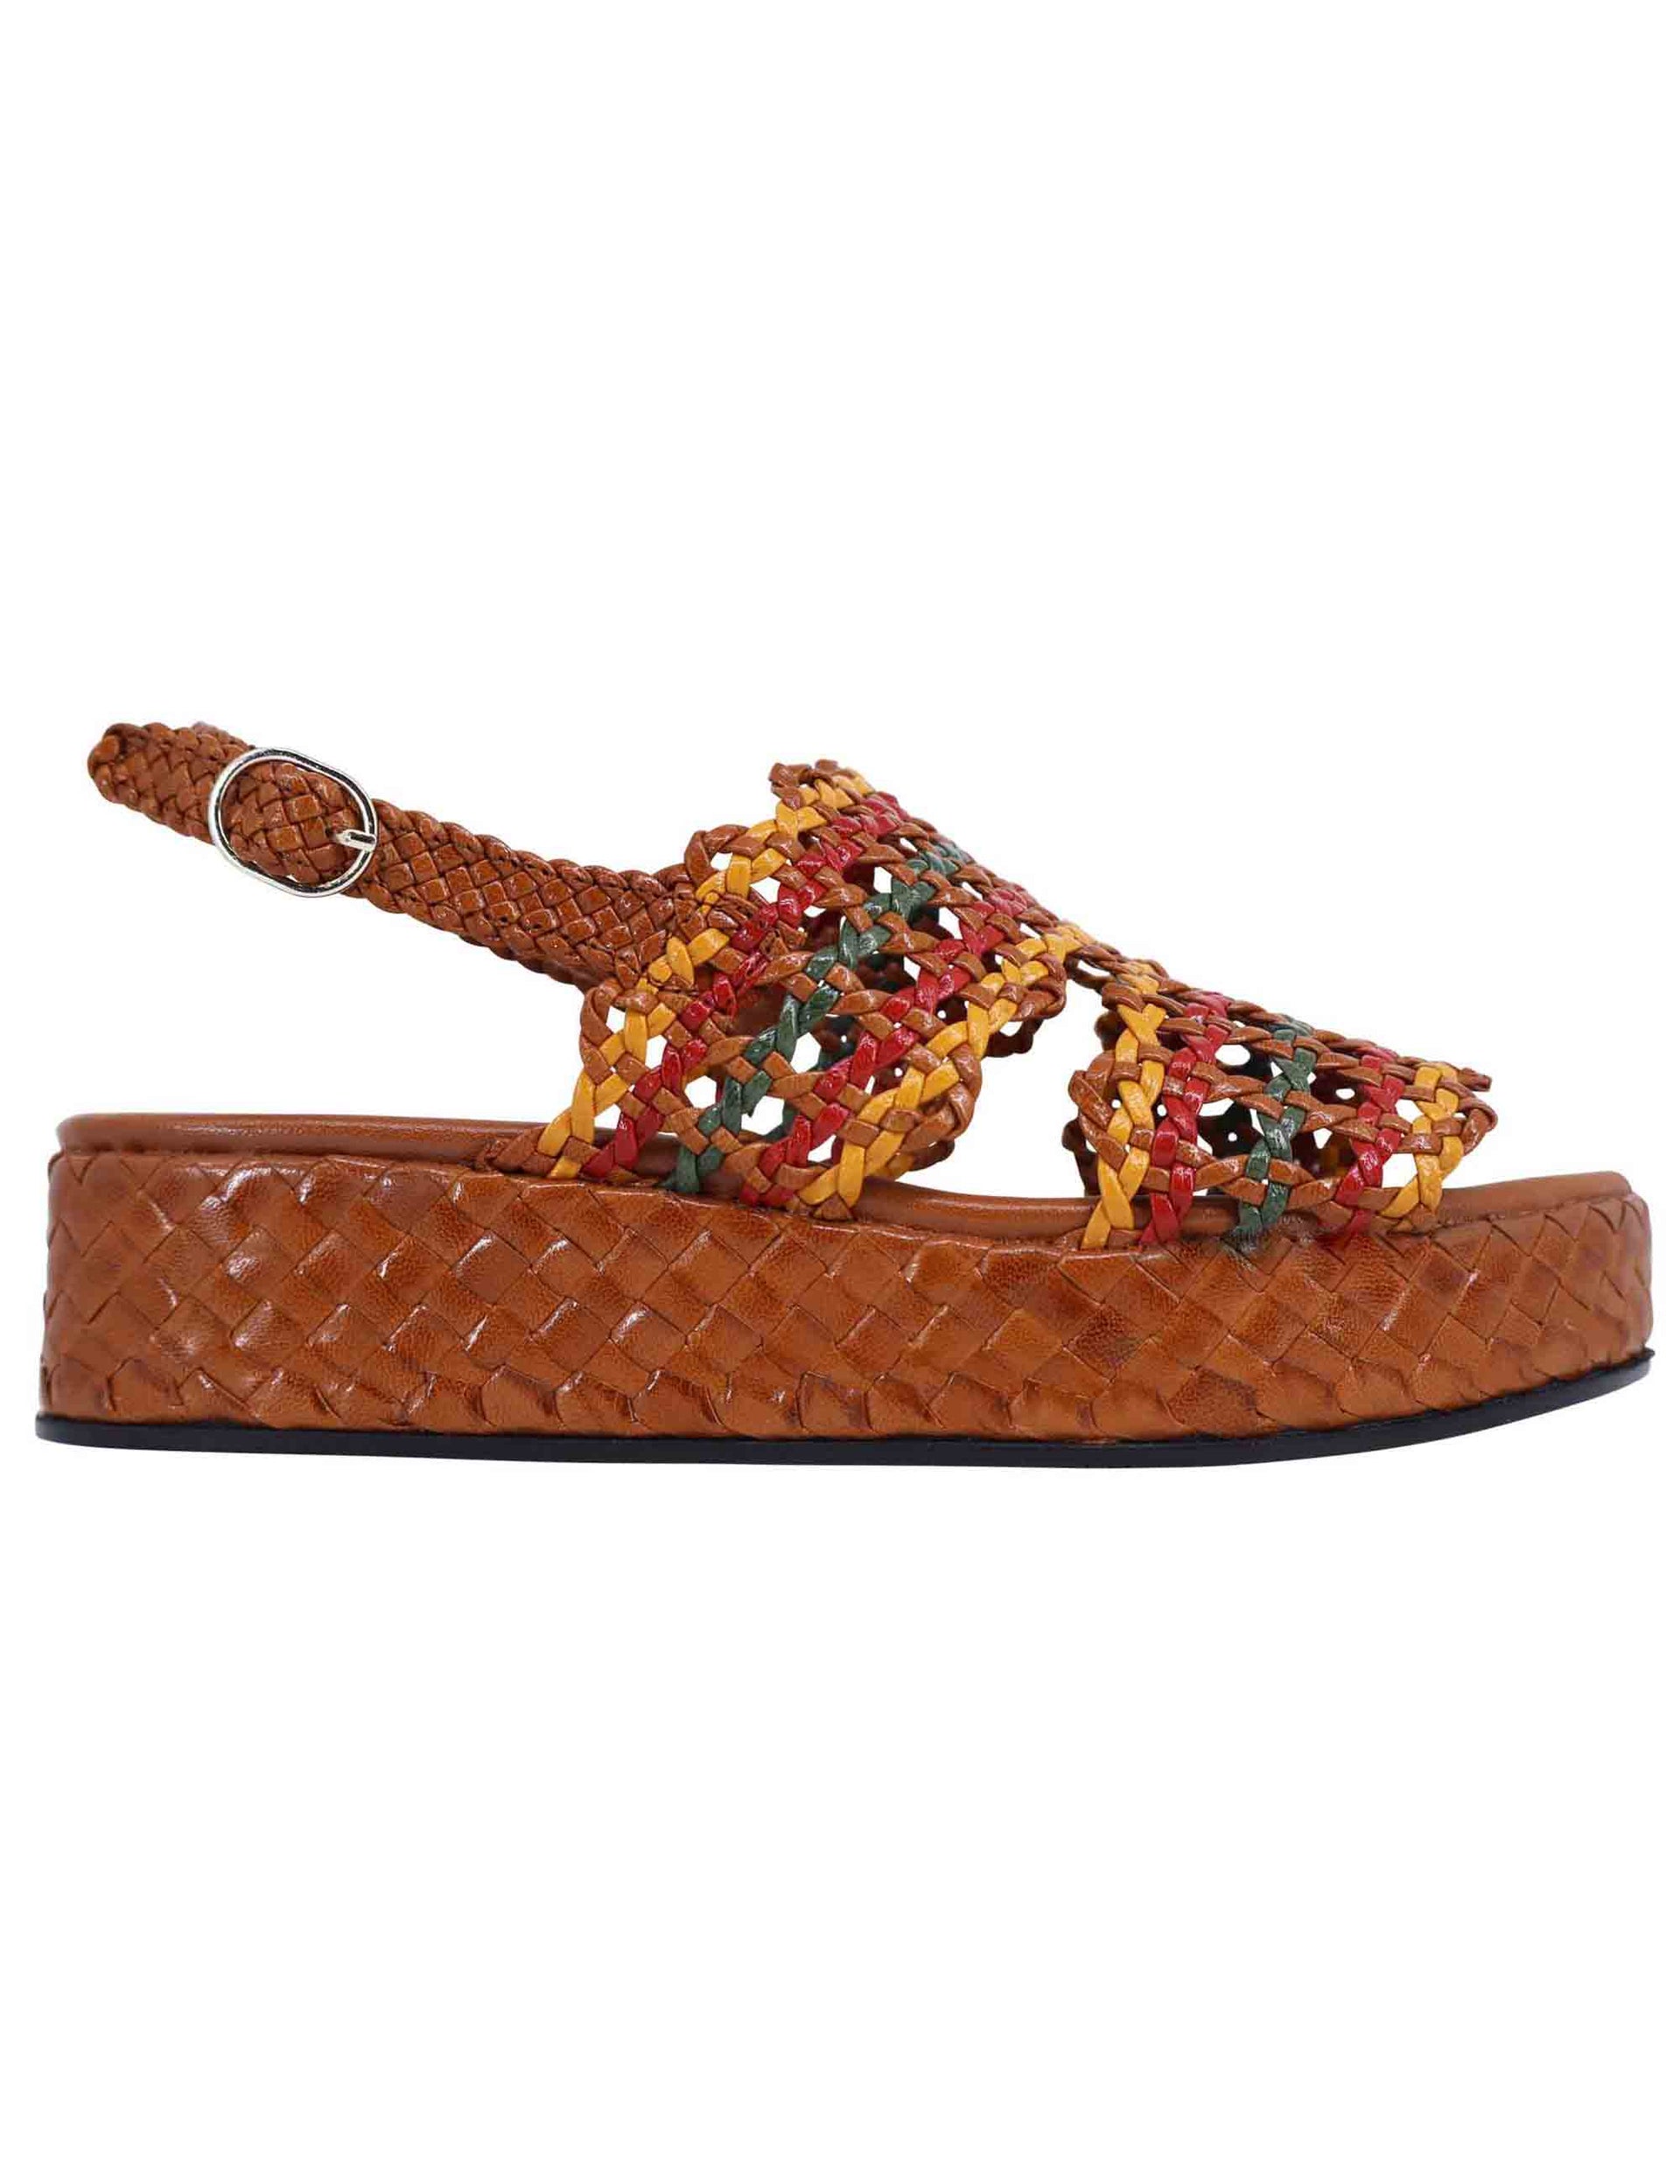 Women's woven tan leather sandals with wedge and back strap